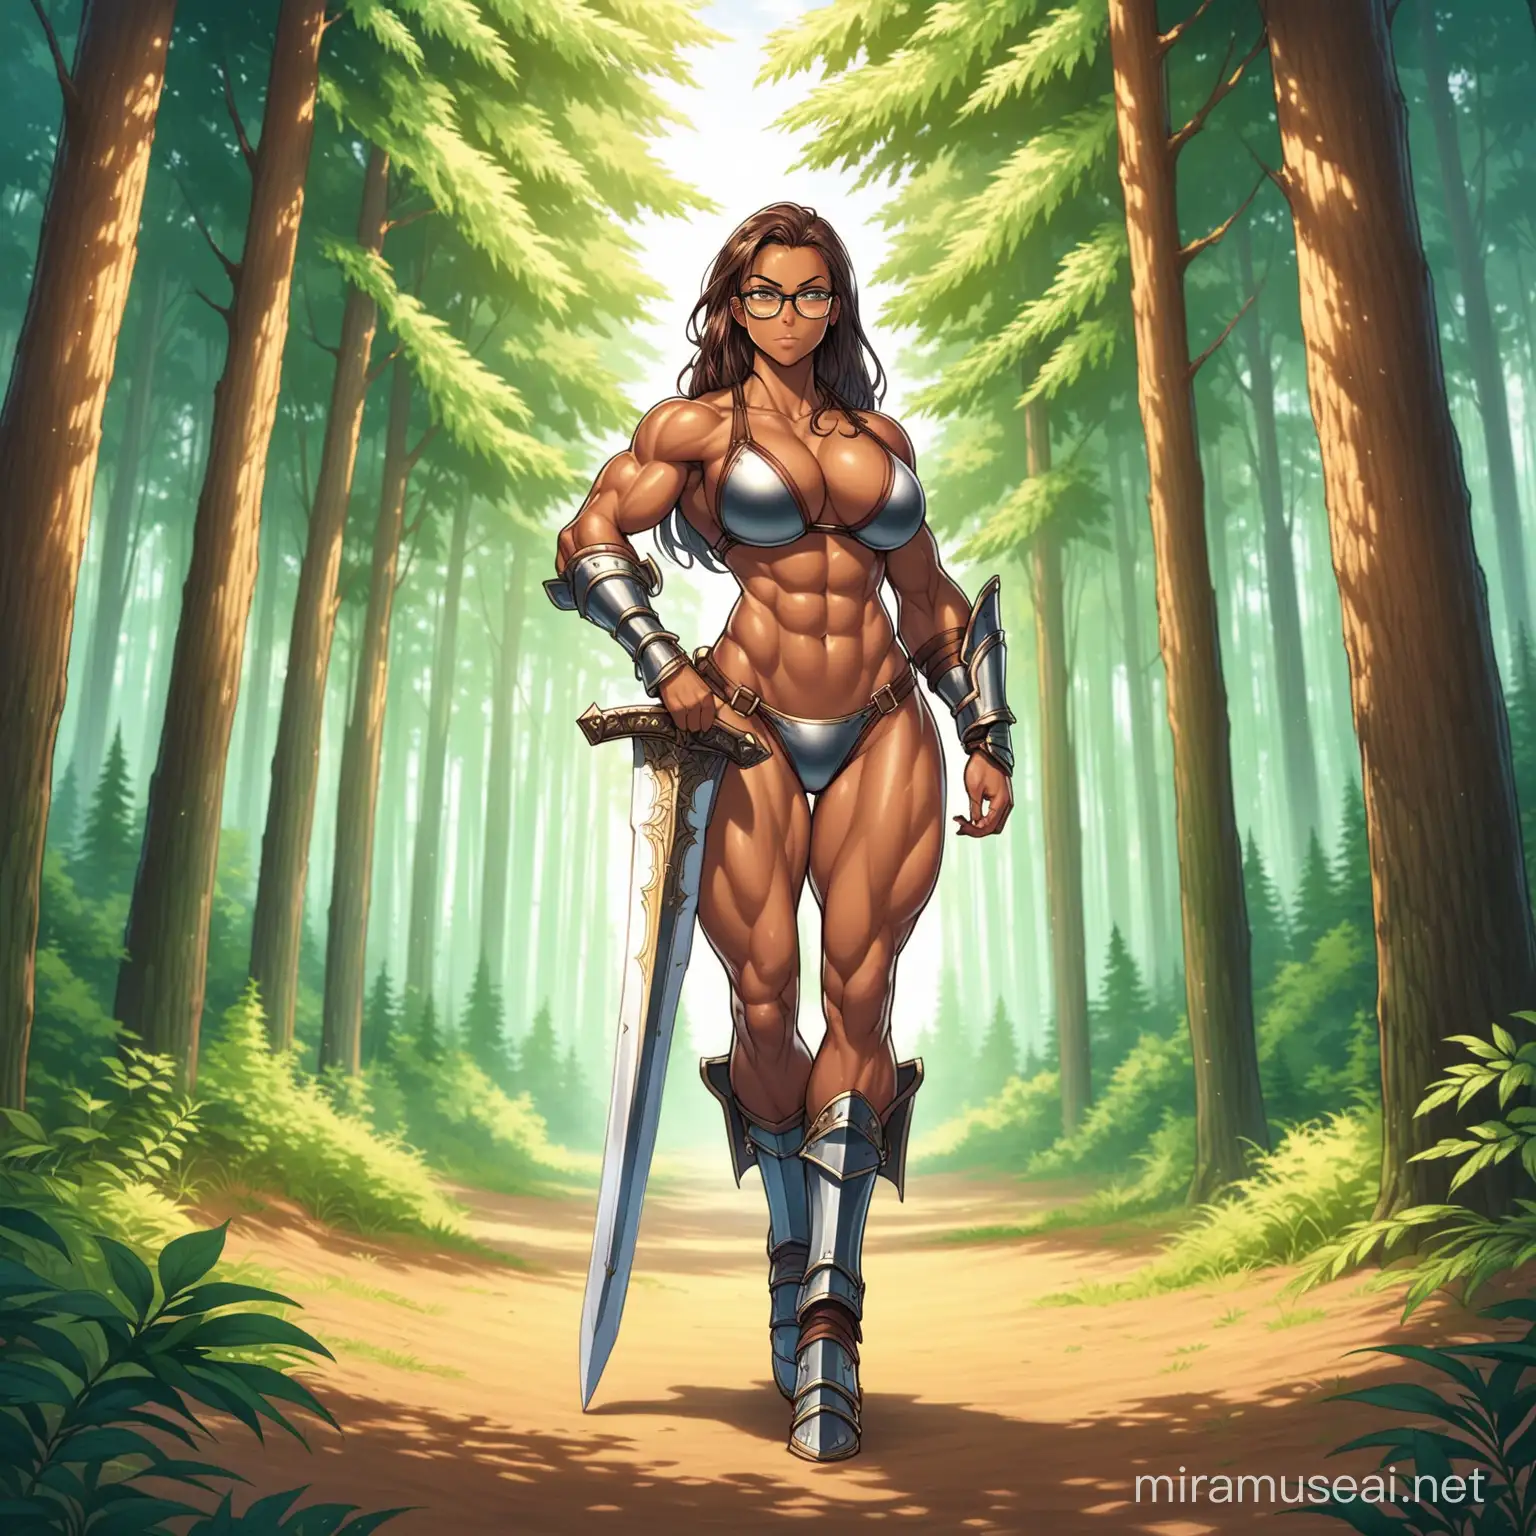 Muscular Female Warrior in Armored Bikini with Sword in Forest